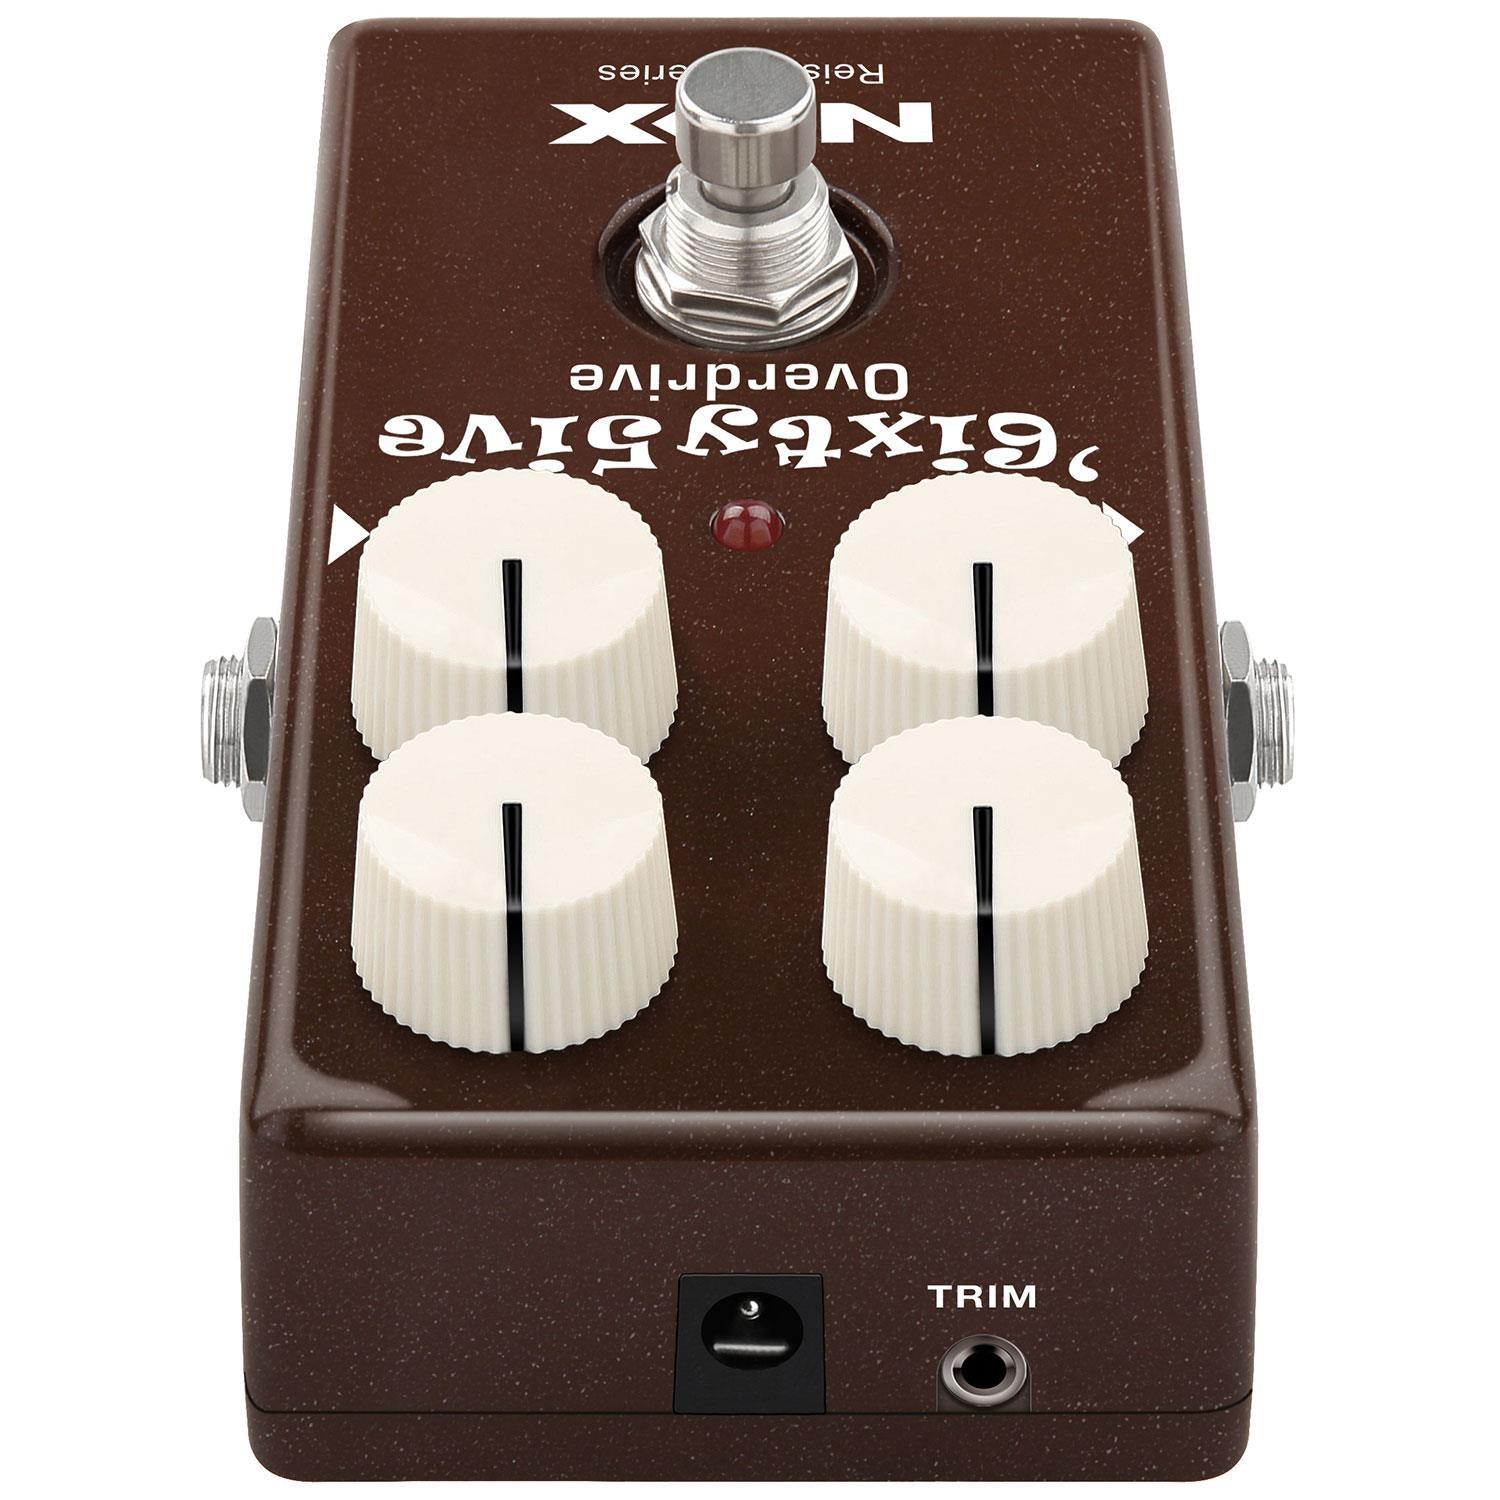 NUX 6ixty 5ive Overdrive Pedal - DY Pro Audio